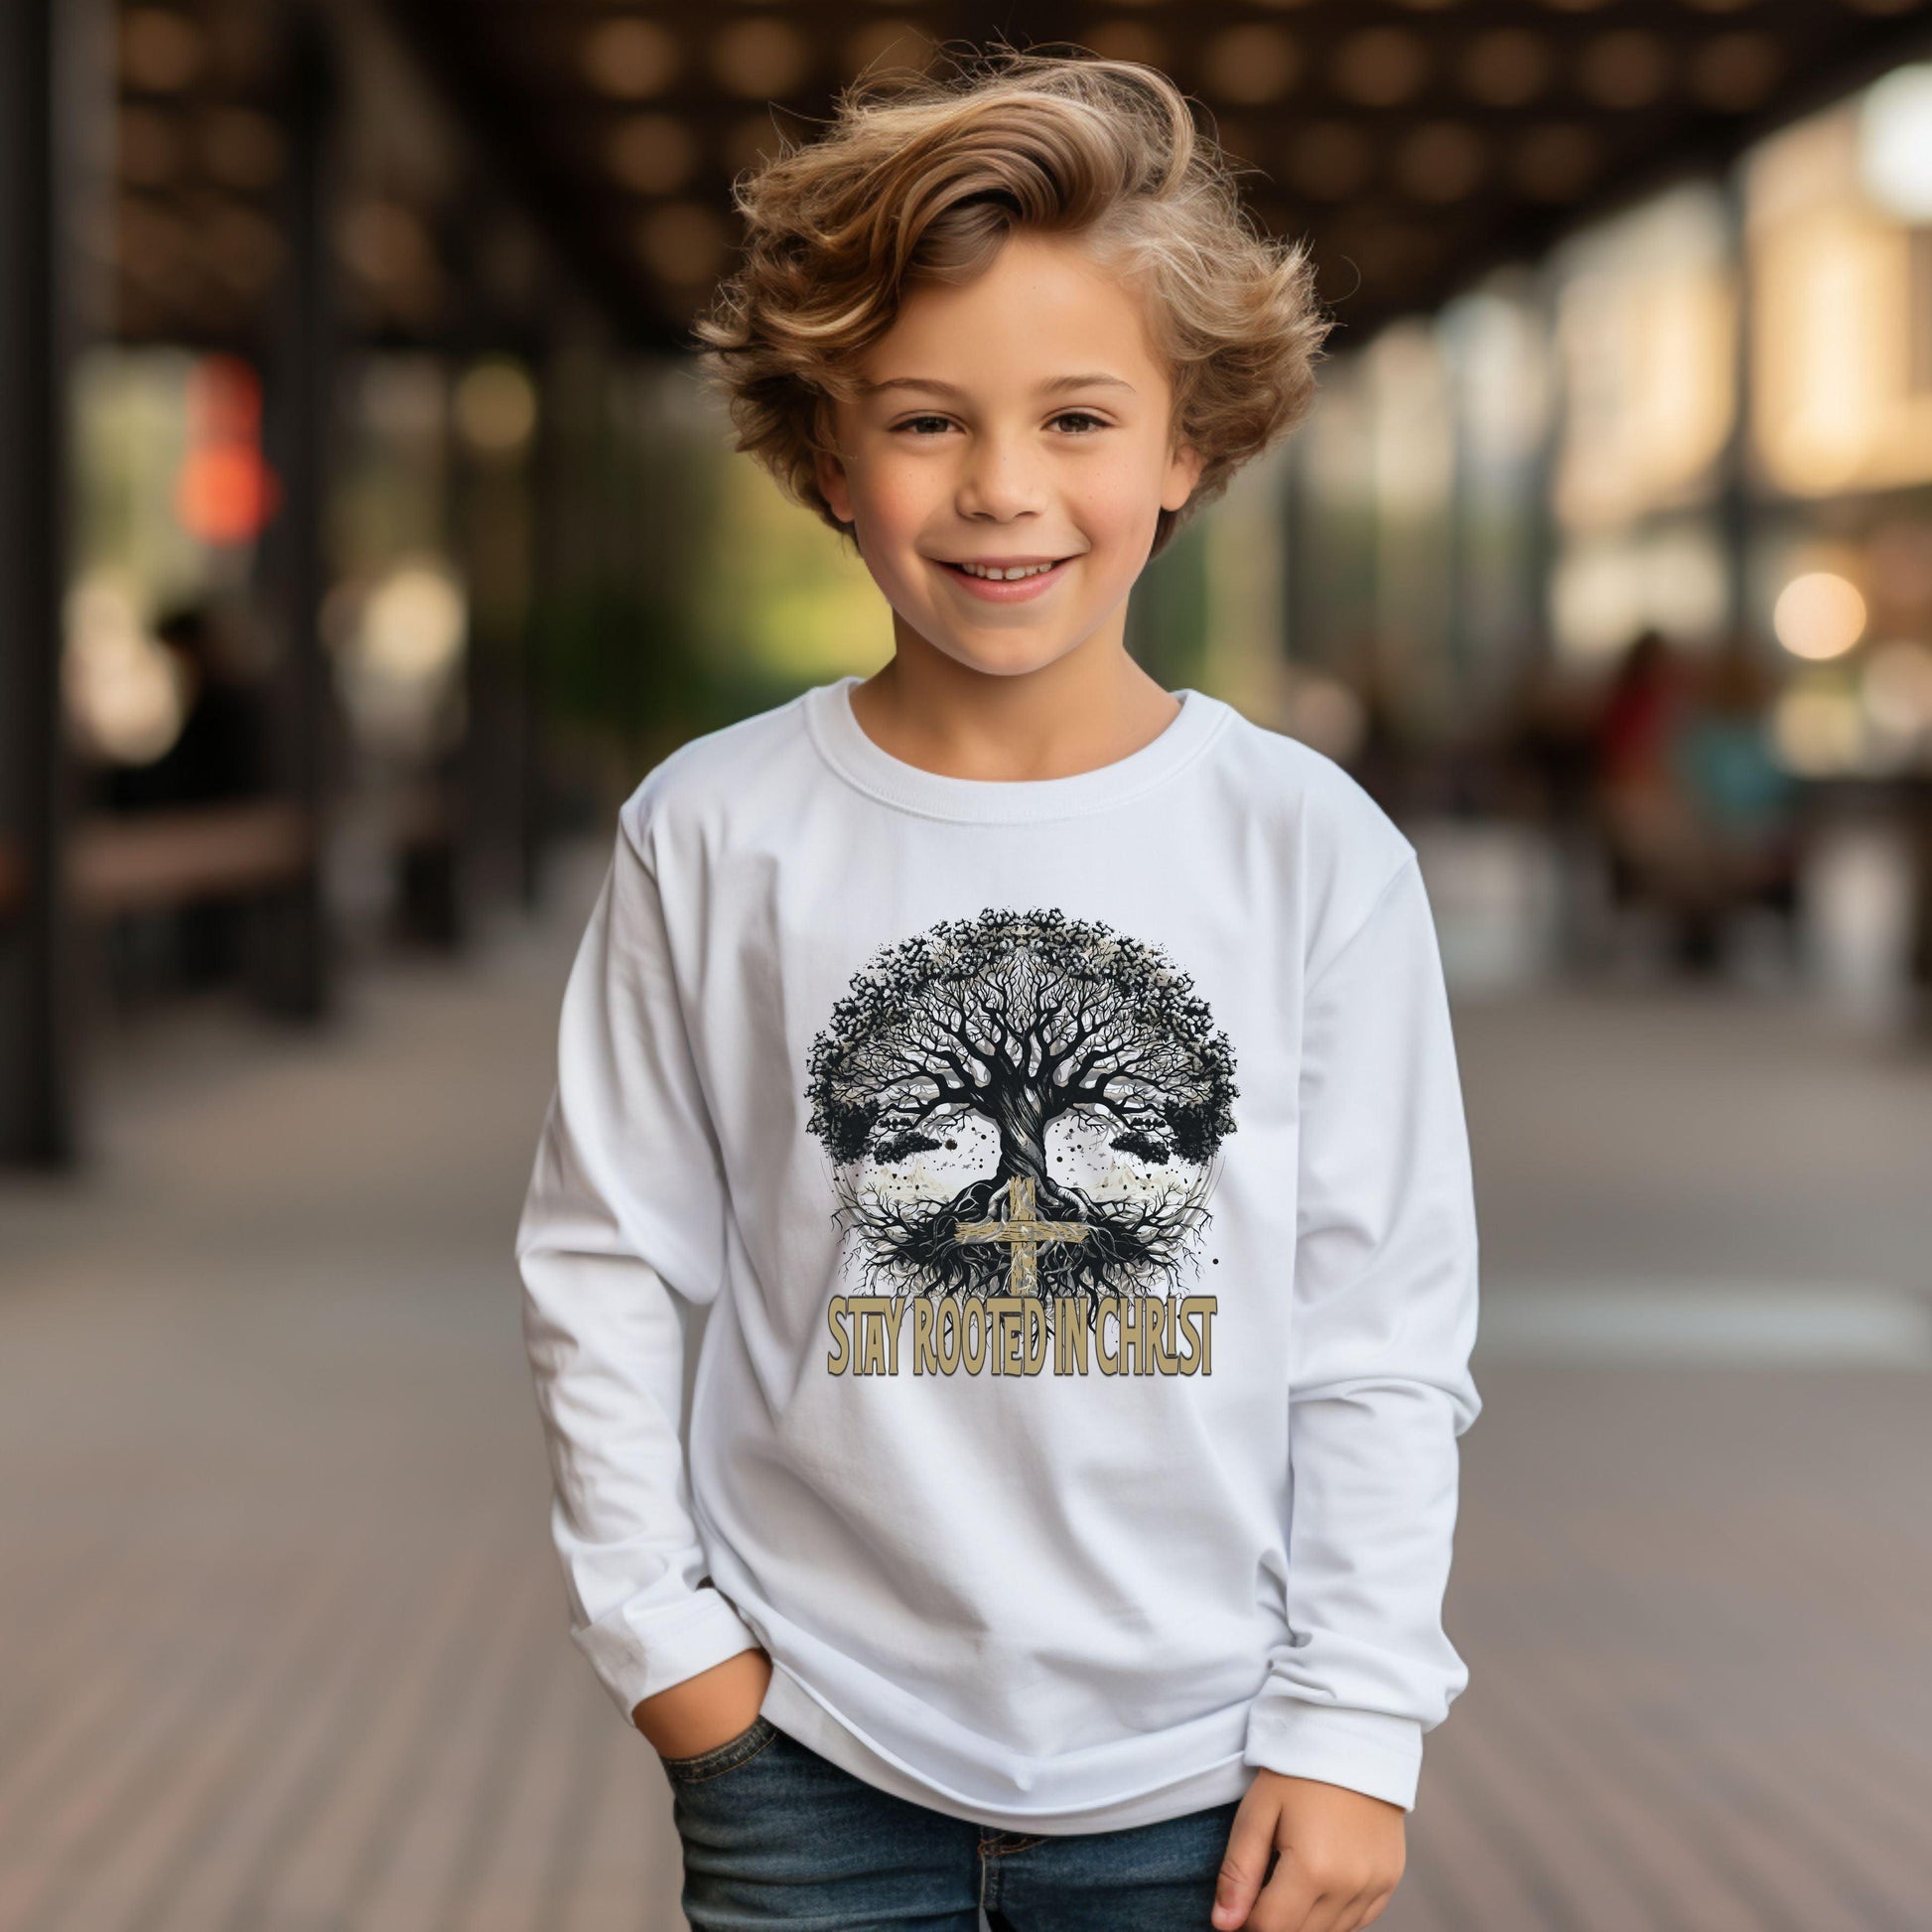 Stay Rooted In Christ Youth Long Sleeve - JT Footprint Apparel